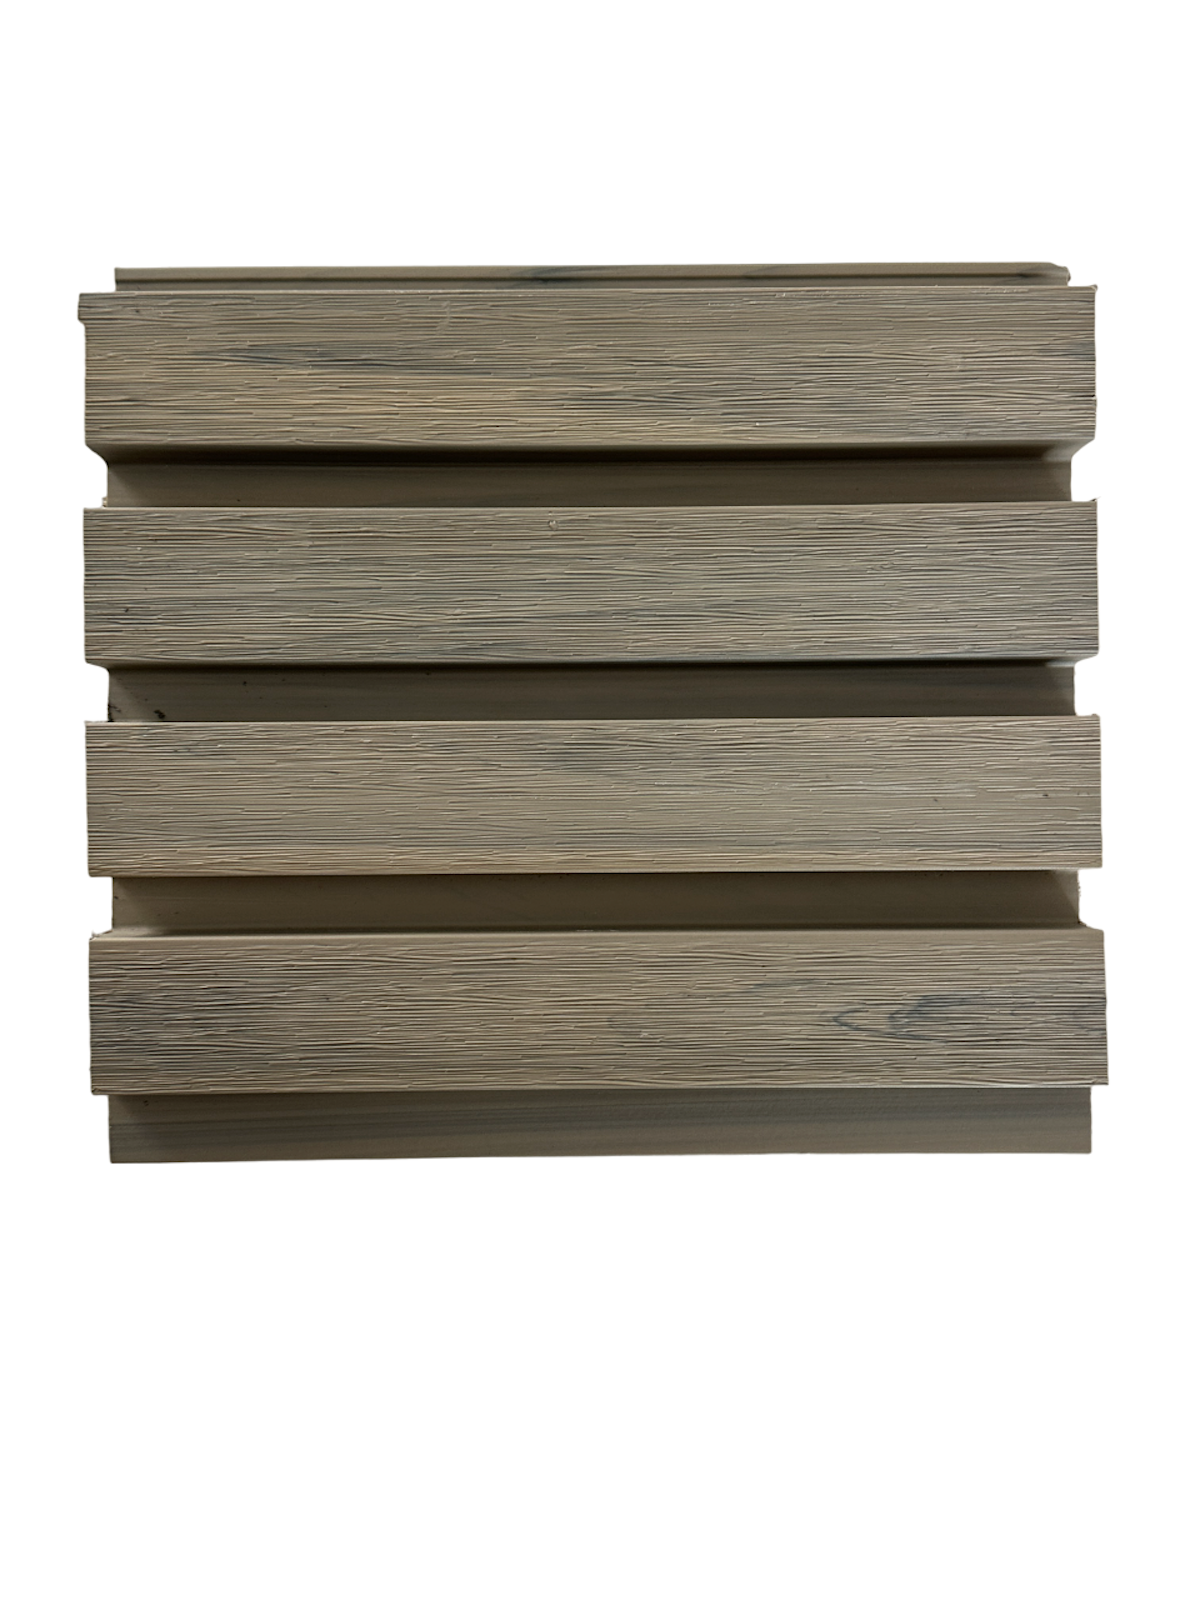 Grey Exterior Siding Panels Accent Wall Decor European Modern Wood Grain 8.5 in by 114 in